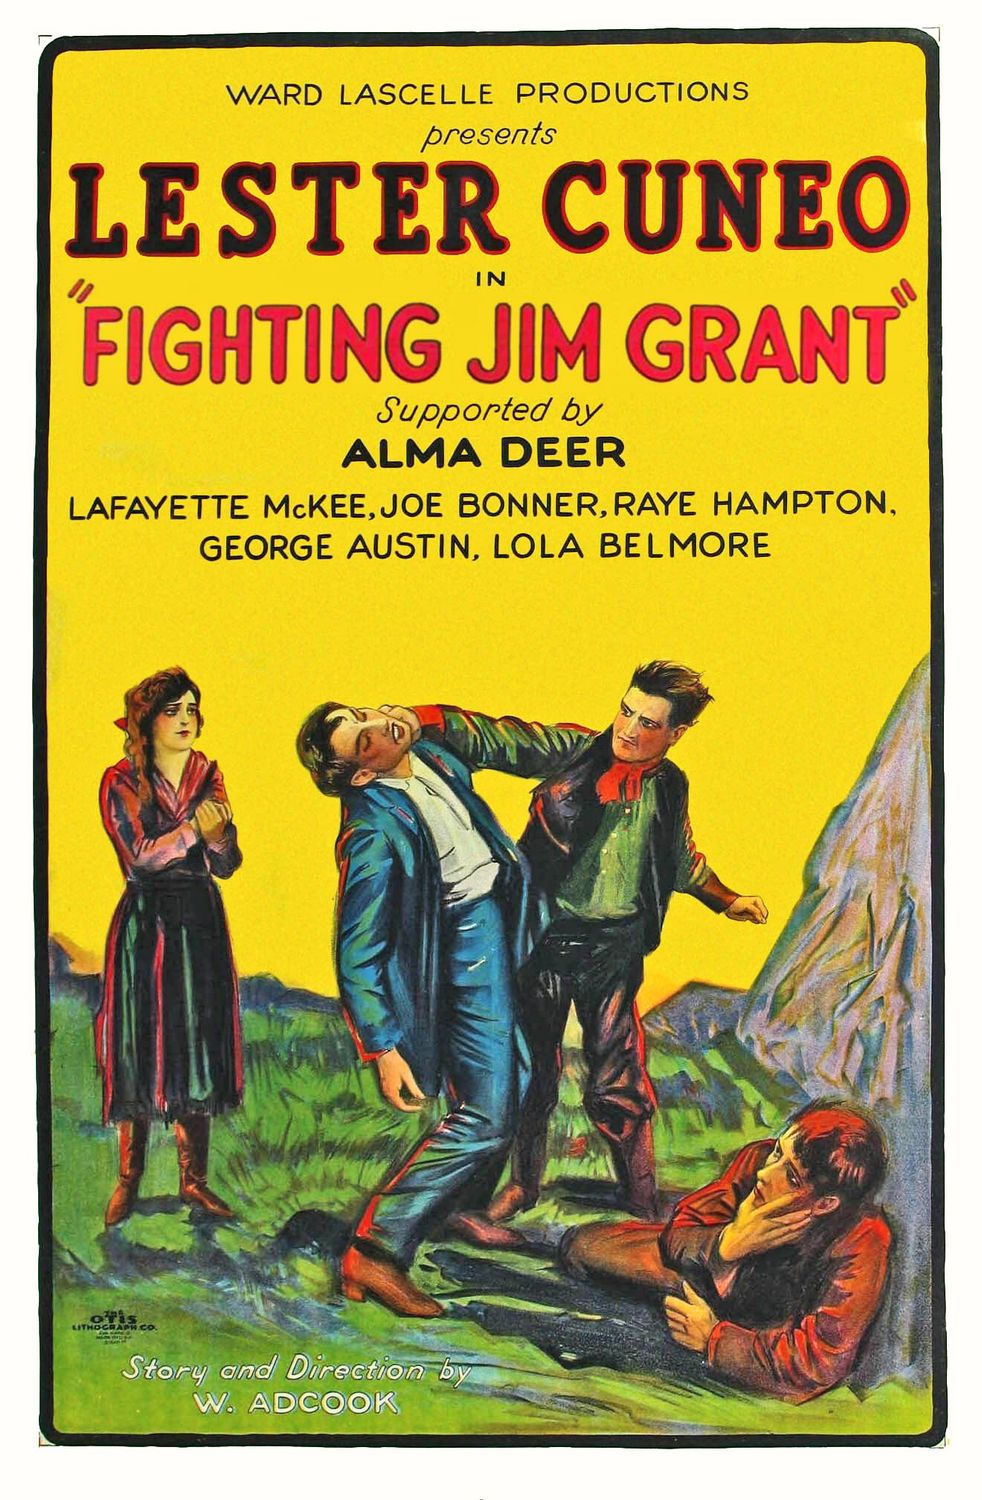 Extra Large Movie Poster Image for Fighting Jim Grant 